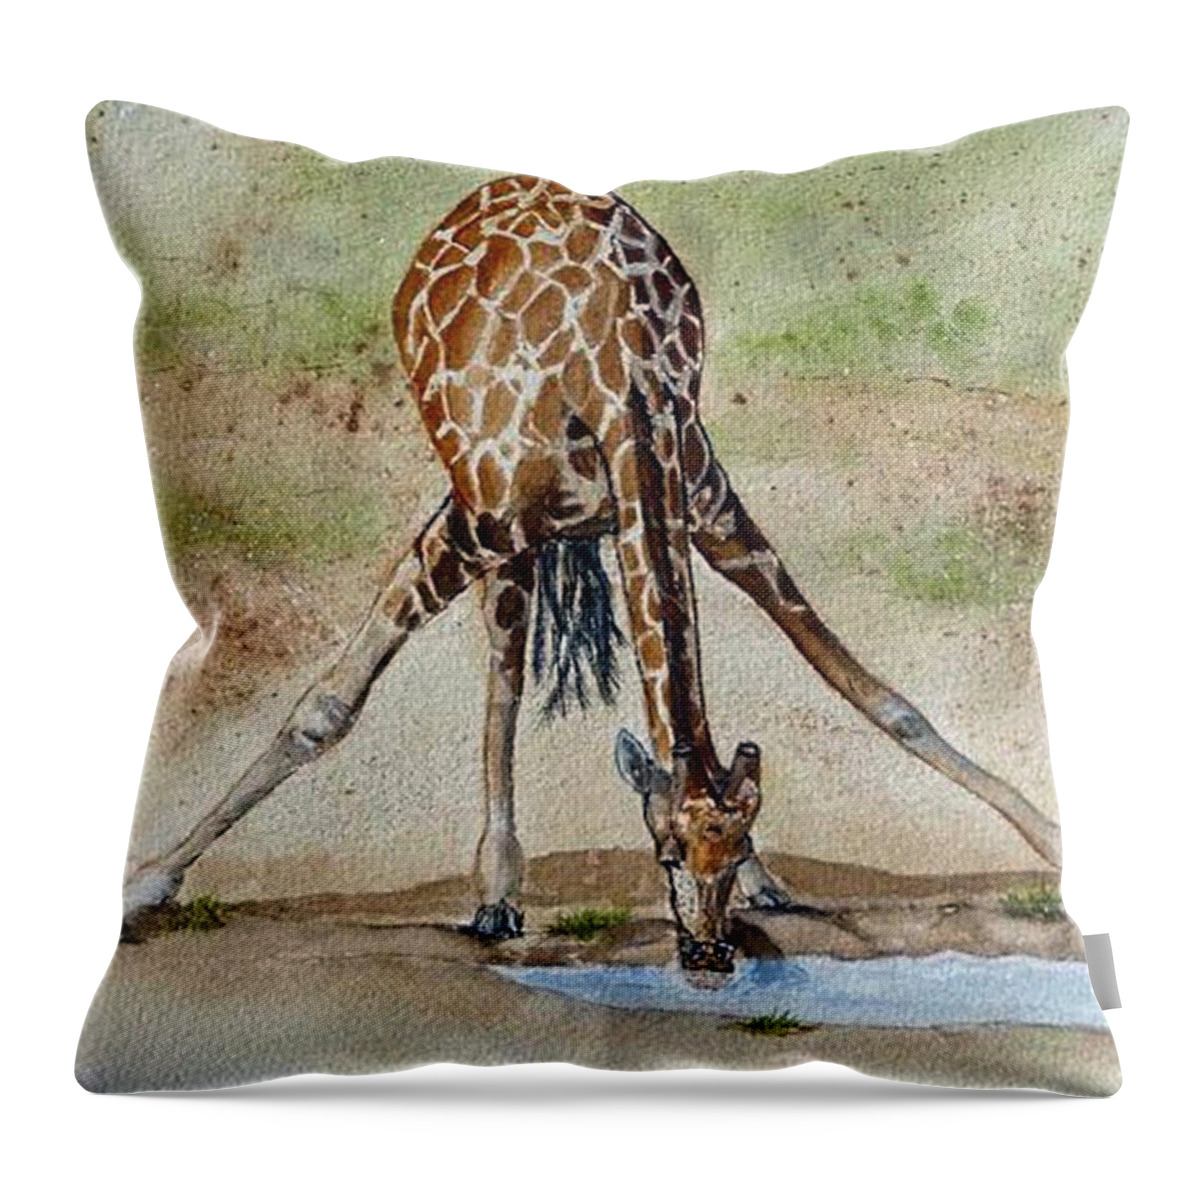 Giraffe Throw Pillow featuring the painting Drinking Giraffe by Kelly Mills